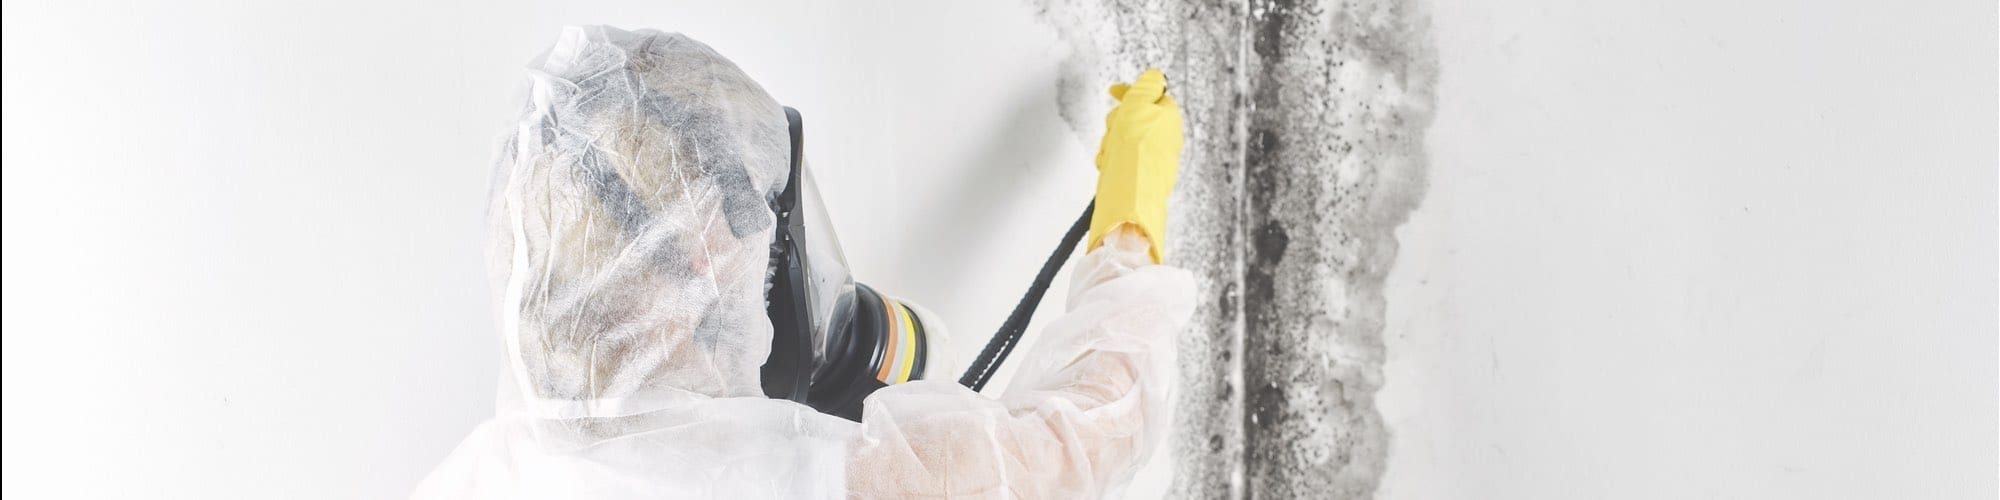 Cleaning Mold - Mold Control Information Series – Article #5